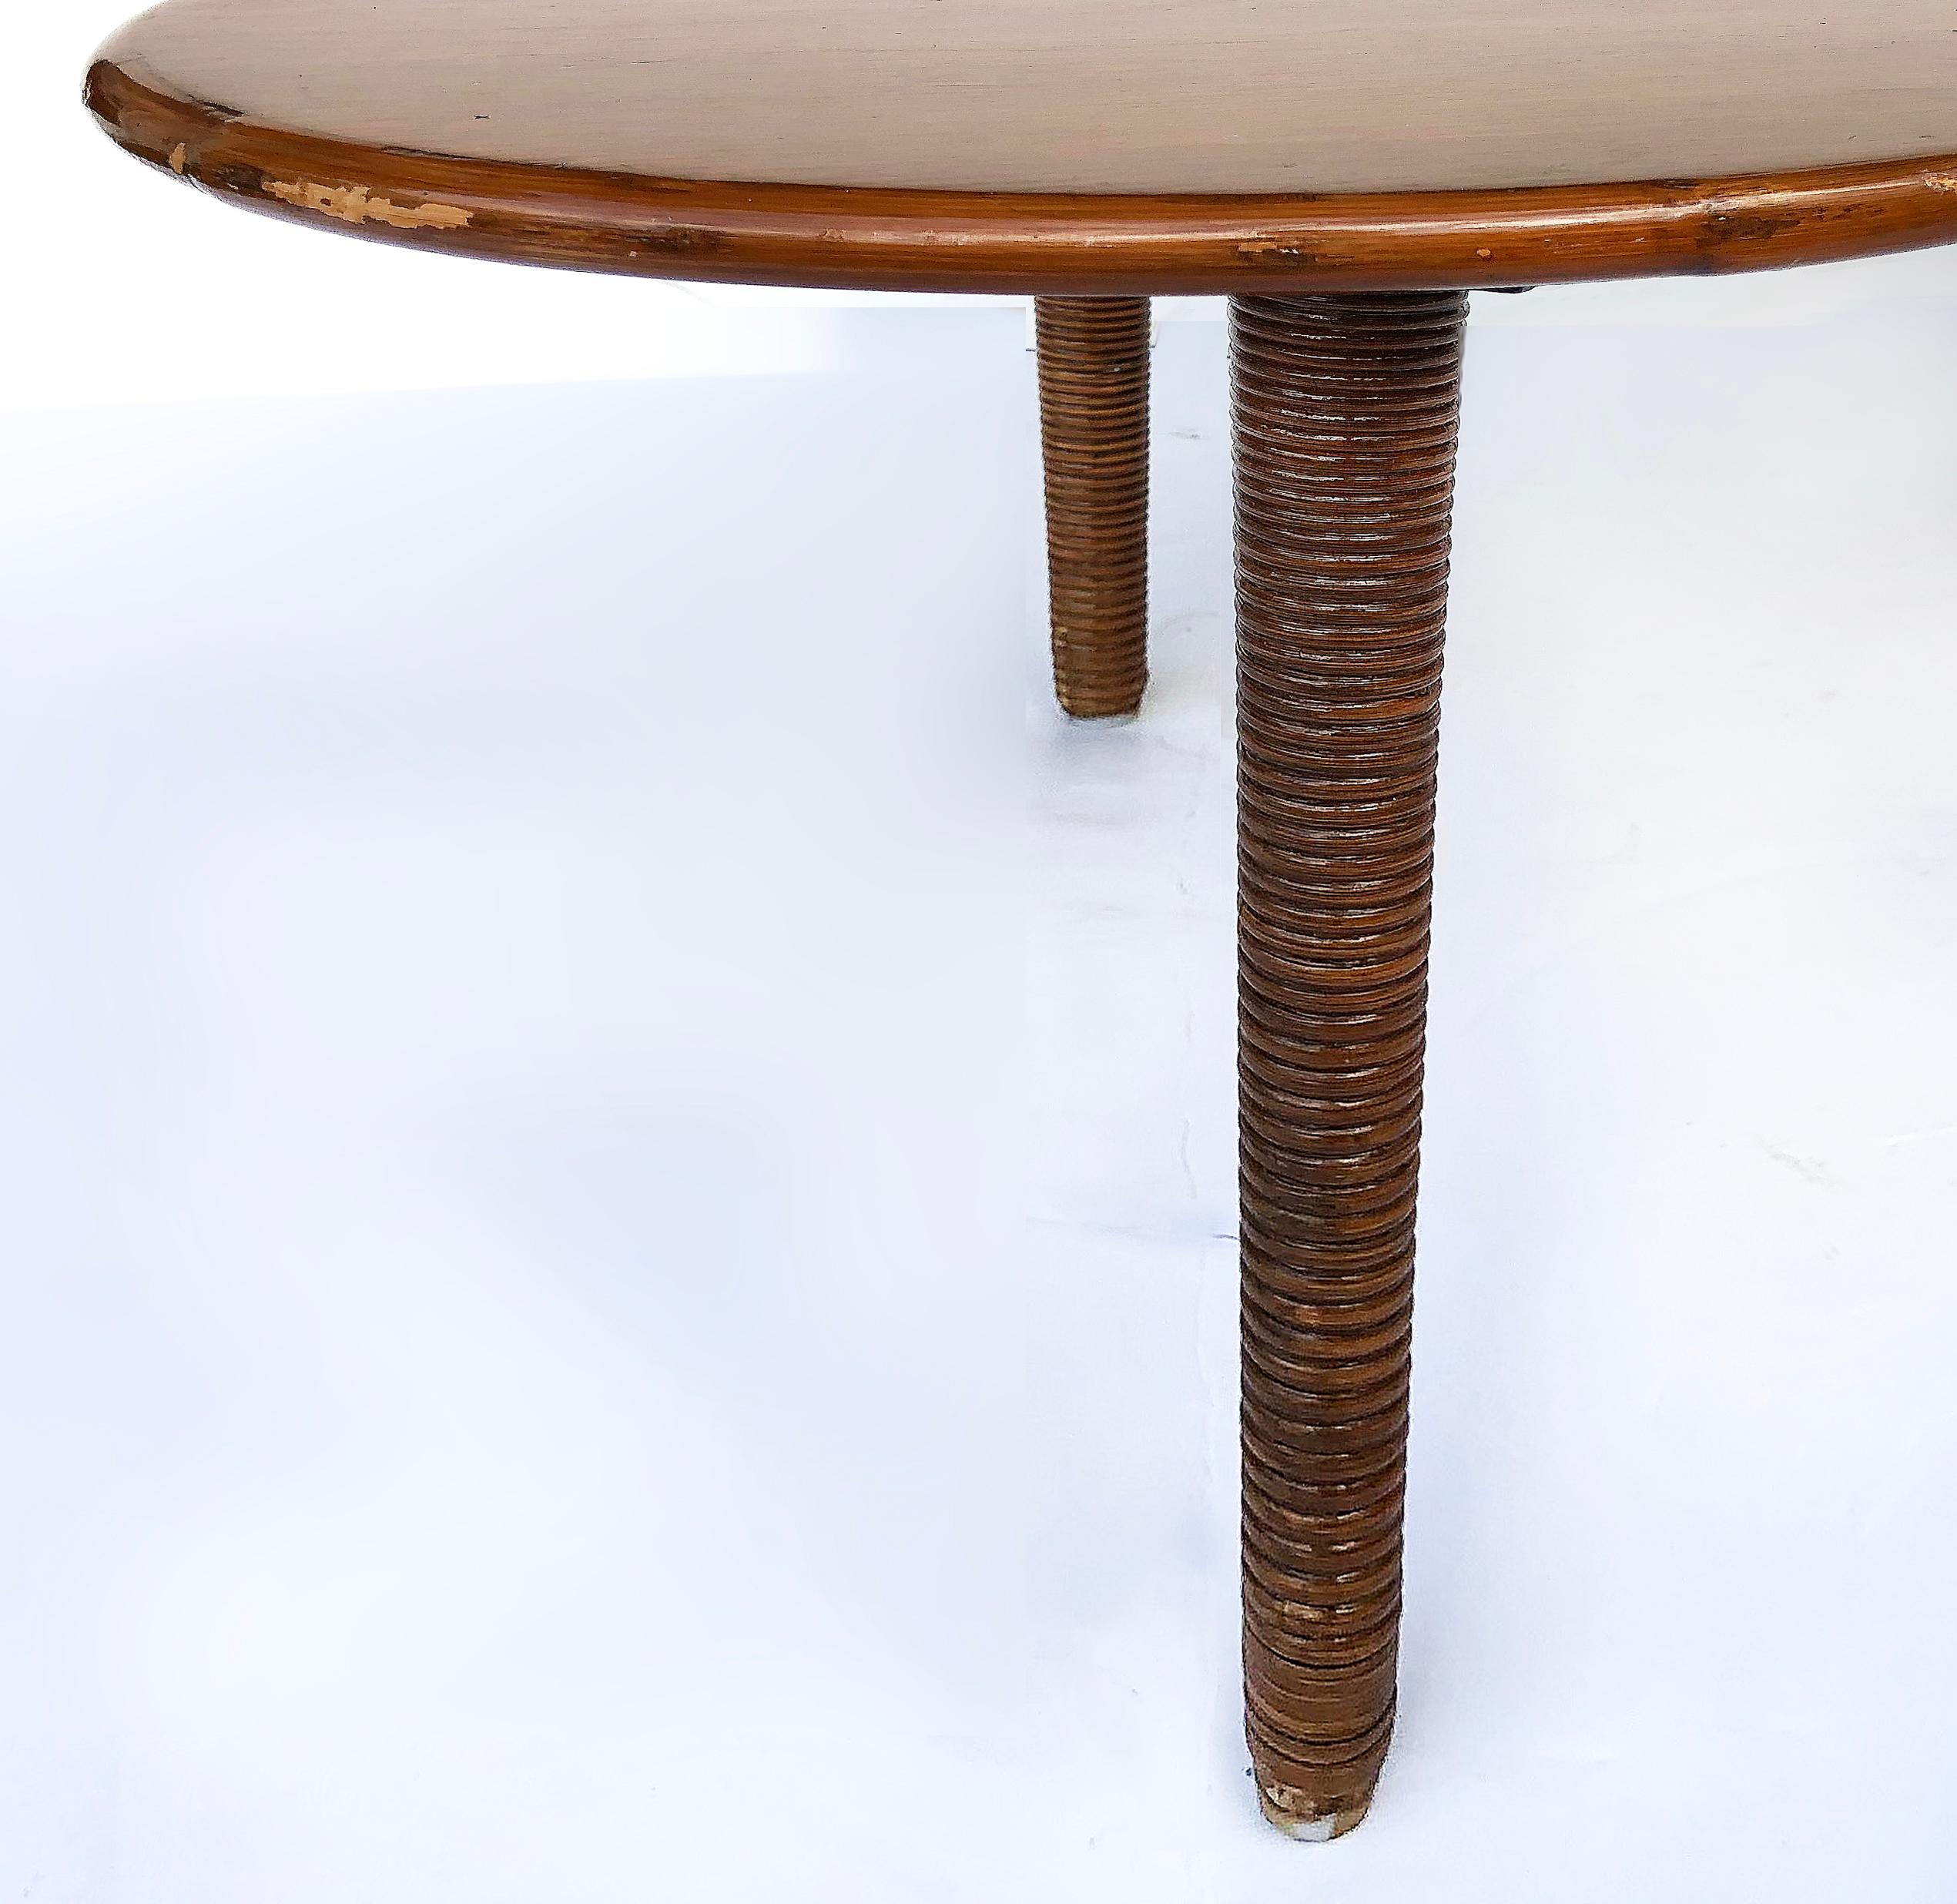 Mid-20th Century Mid-Century Modern Biomorphic Form Coffee Table with Tapered Reed Legs